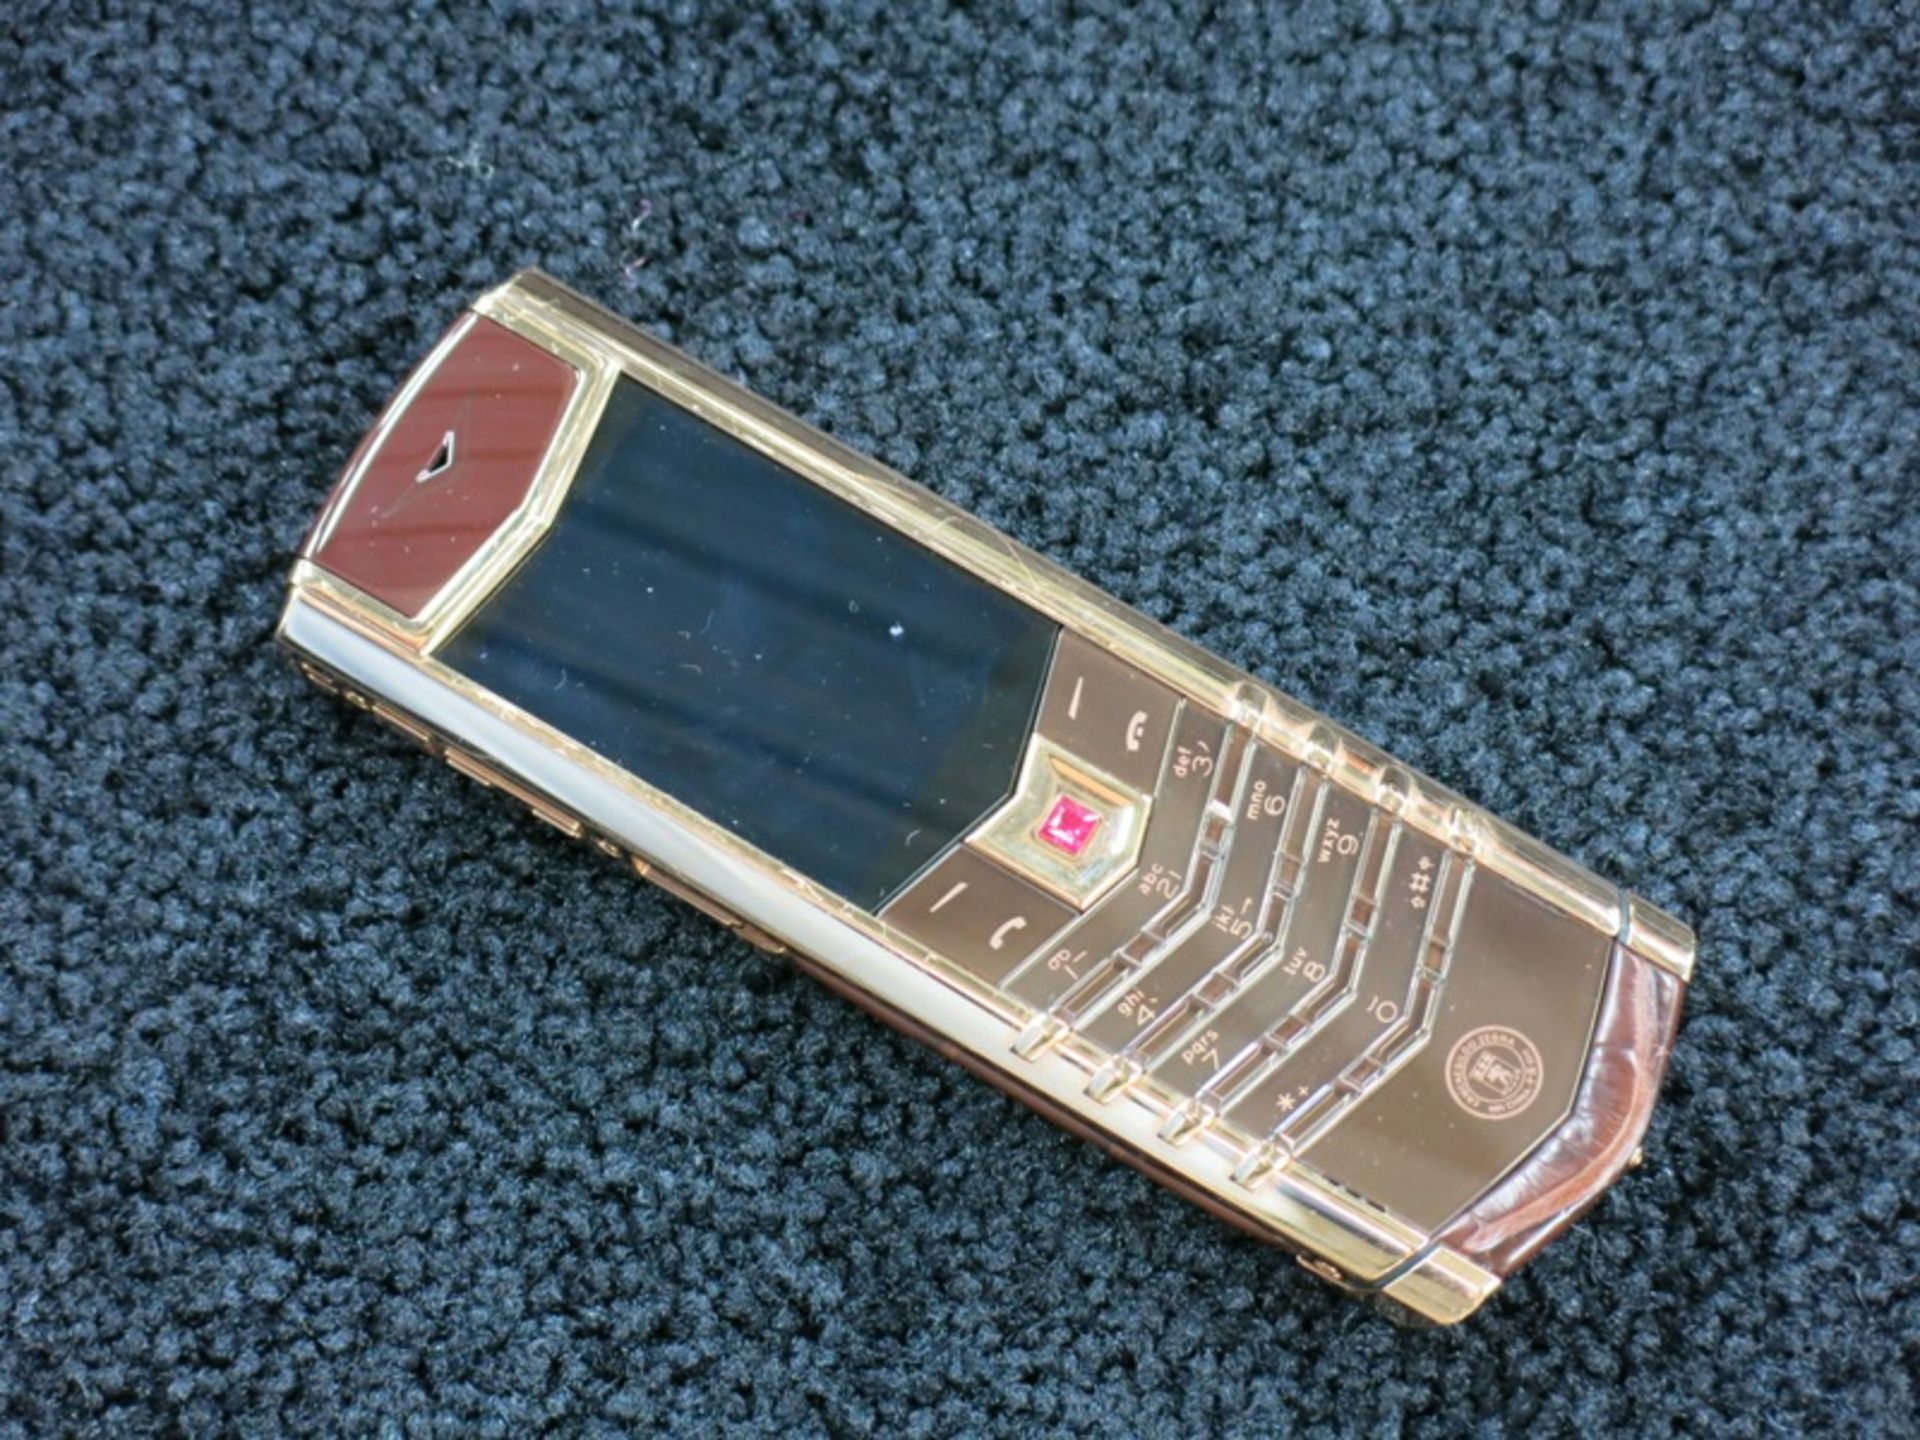 Vertu 18kt Red Gold Signature S Phone with Ruby Select Key. Furnished with Ceramic Pillow,